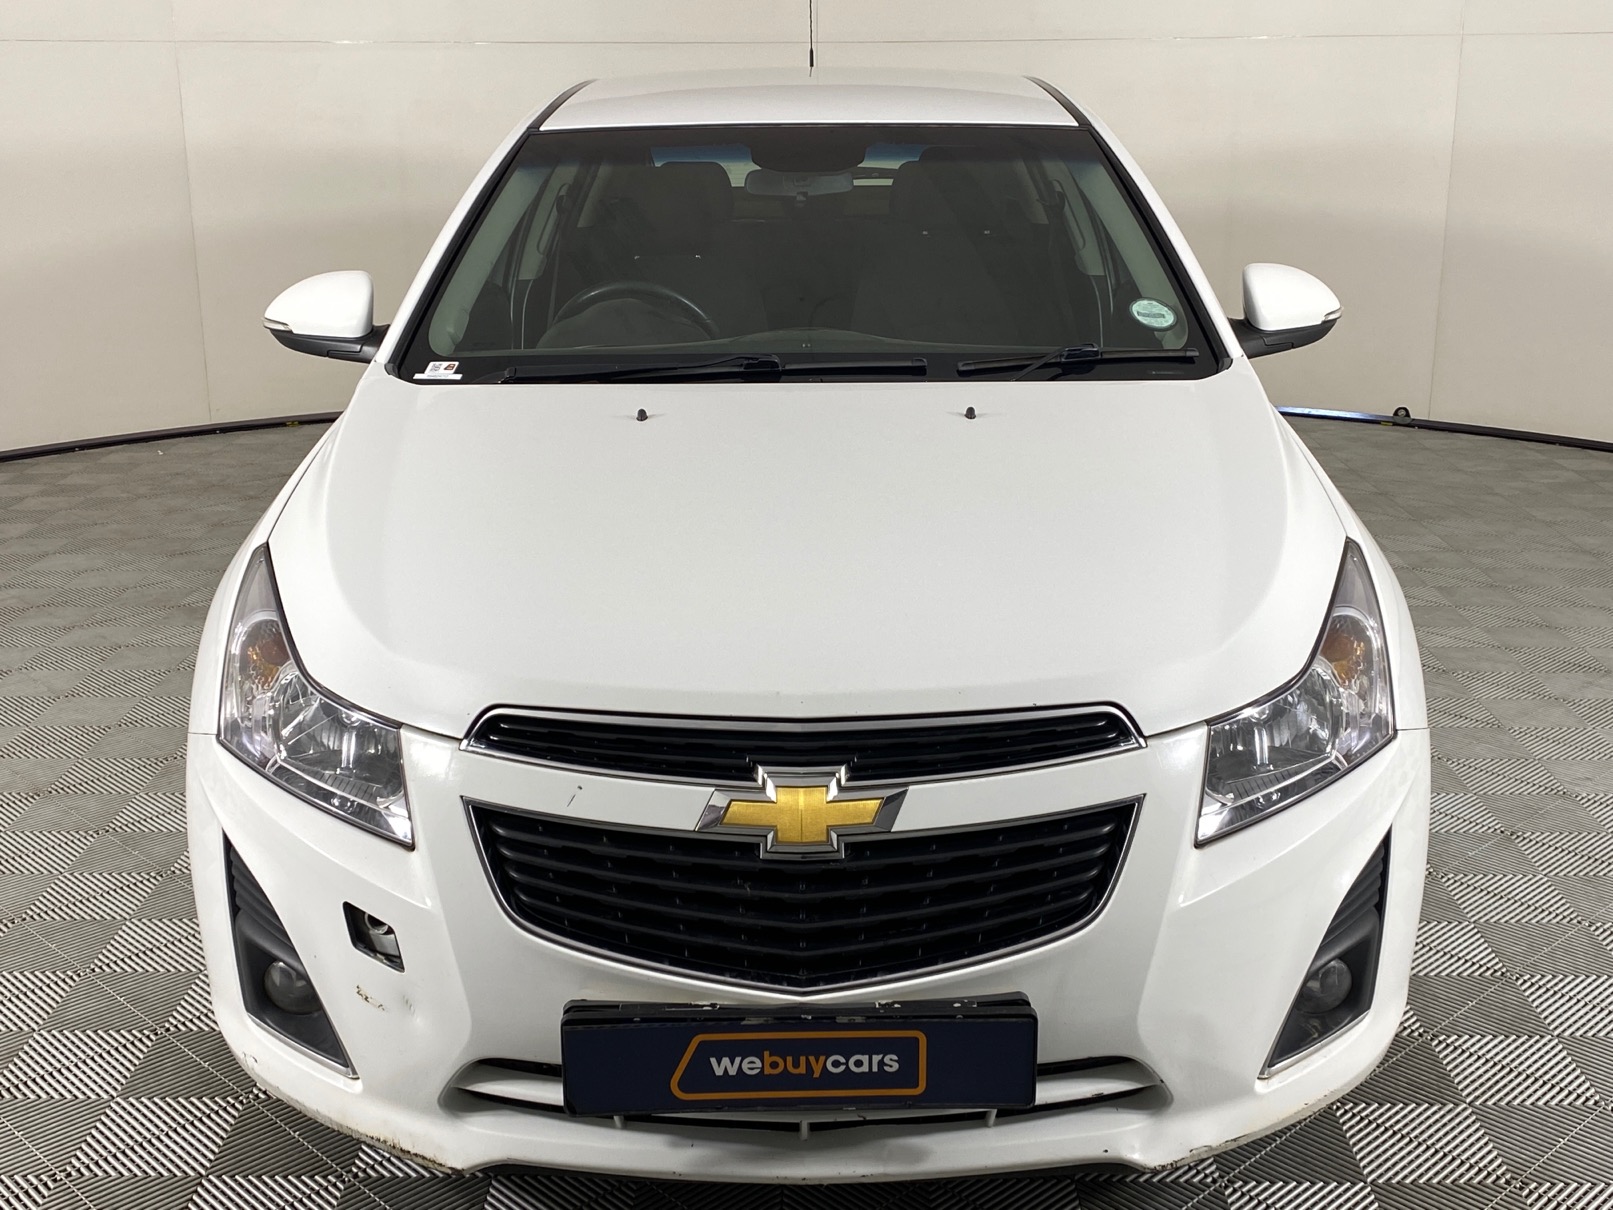 Used 2015 Chevrolet Cruze 1.6 LS for sale WeBuyCars